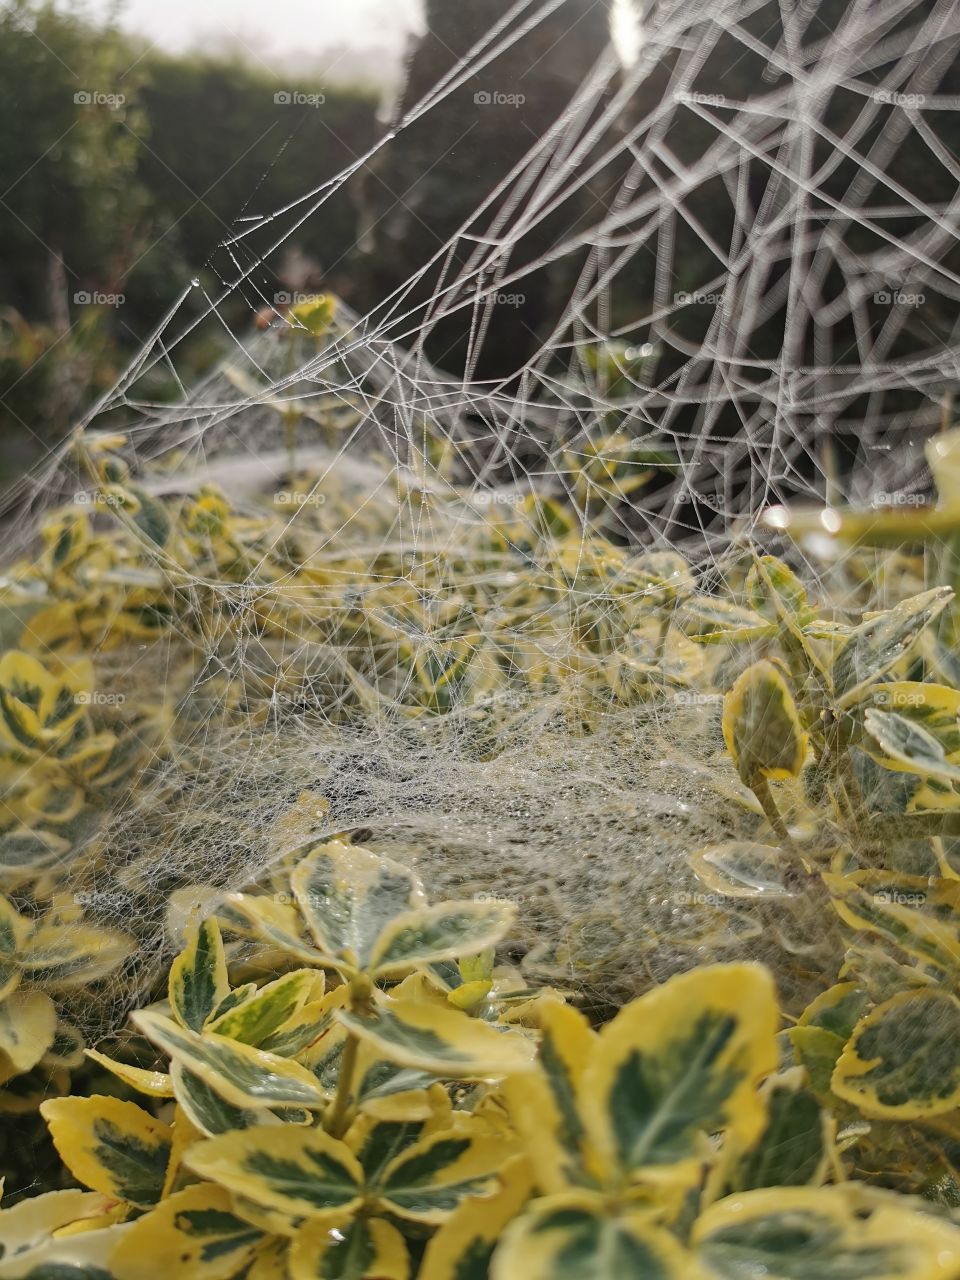 Dew on spiders Web